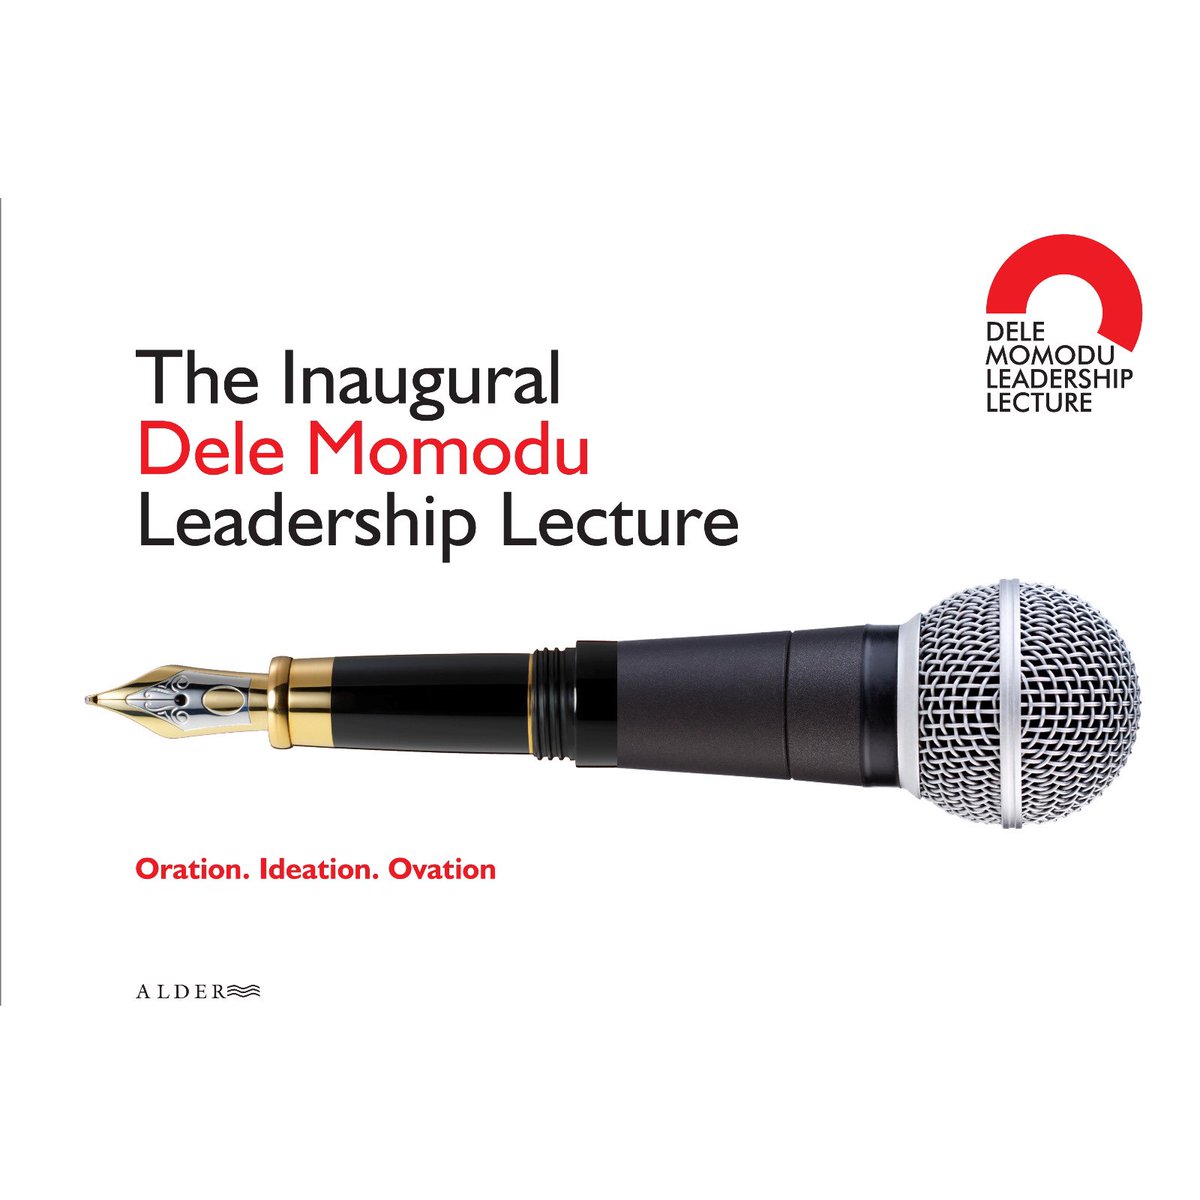 Let me know if you’d love to attend the Inaugural @DeleMomodu Leadership Lecture in Lagos. Will send you an invitation. It’s next Thursday in VI.